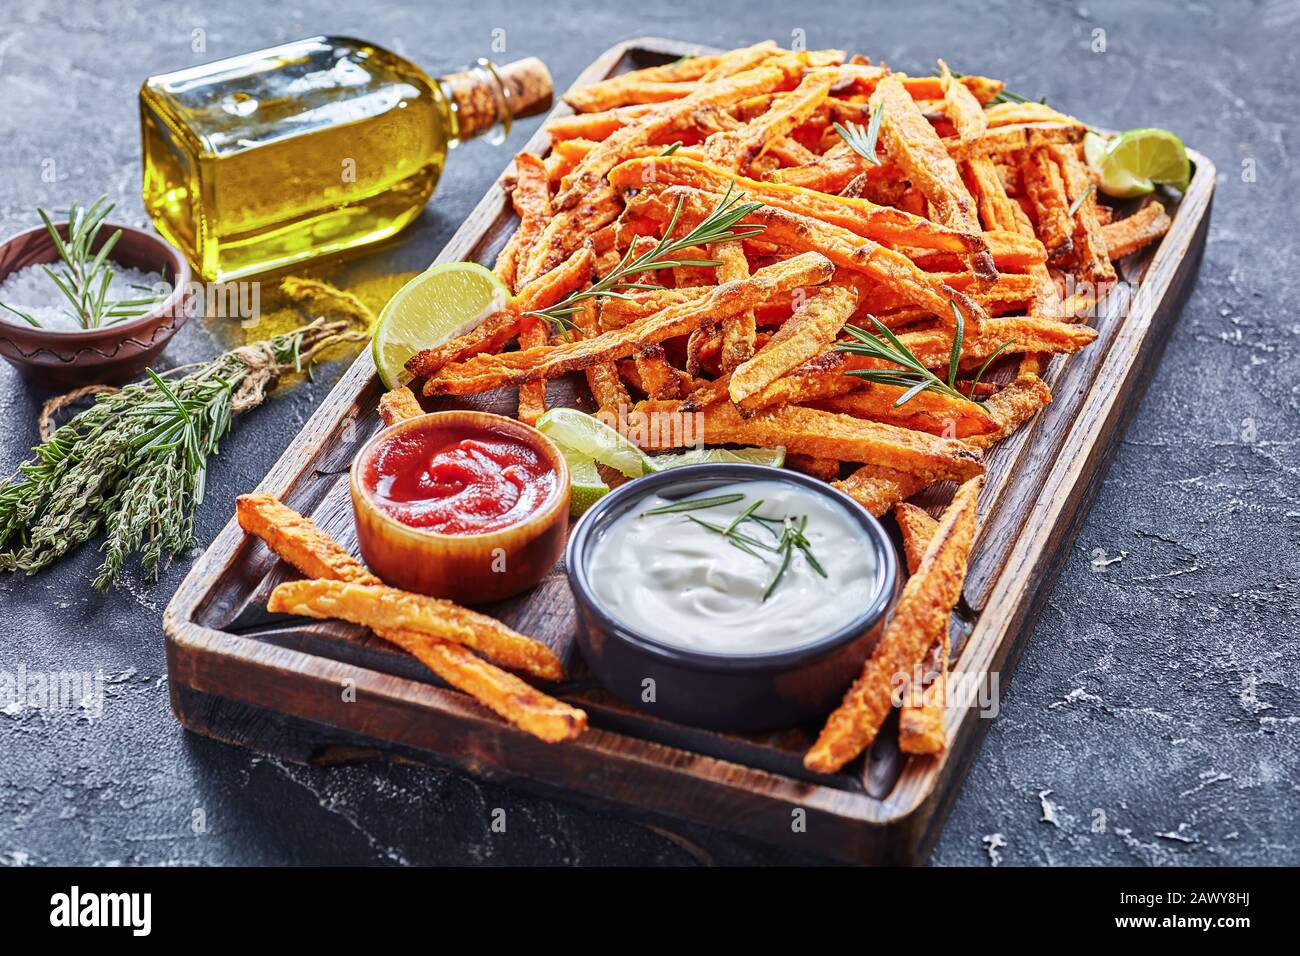 crispy salty Sweet Potato Fries with sauce and ketchup on a rude wooden board on a concrete table with lime and bouquet of aromatic herbs, horizontal Stock Photo